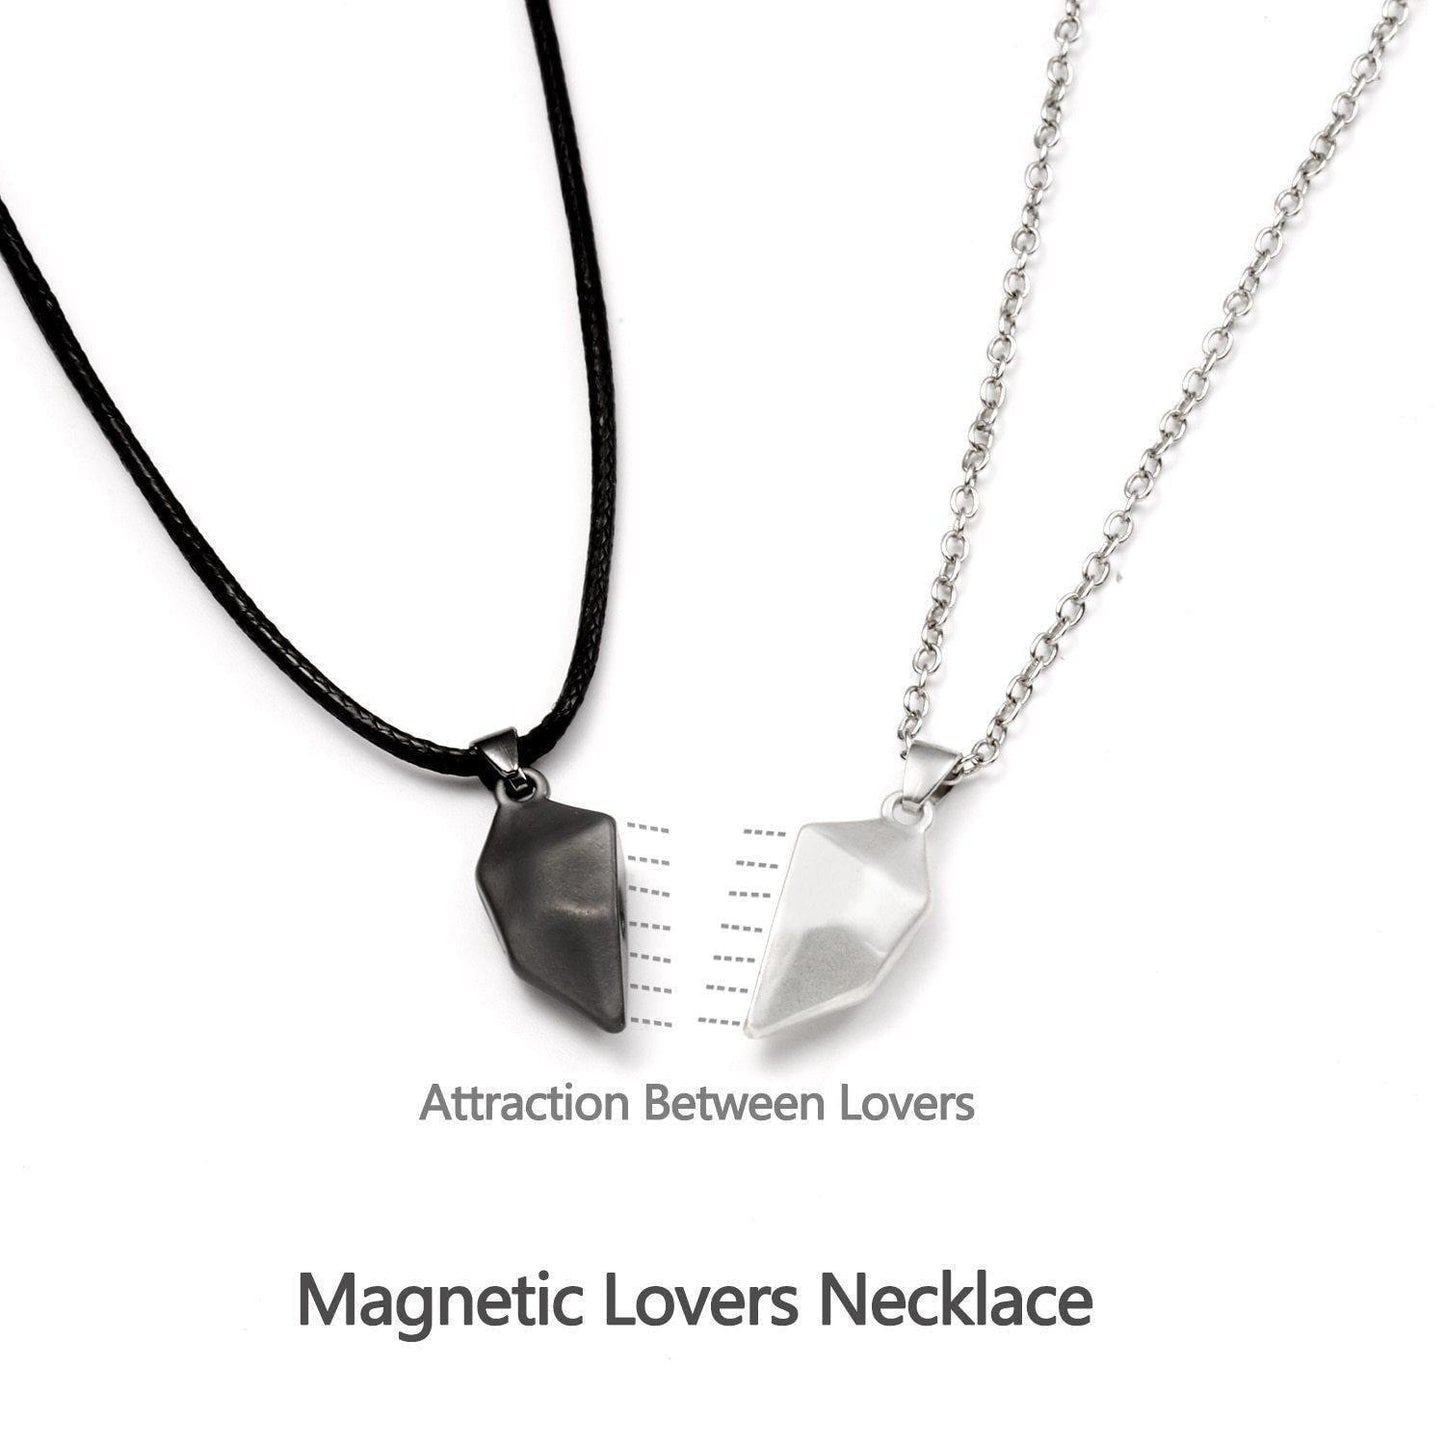 Magnetic Best Friend Necklace For 2 for Christmas 2023 | Magnetic Best Friend Necklace For 2 - undefined | best friend necklace for 2, best friend necklaces magnetic, Friendship Pendant Necklaces, gift ideas for Best Friends, Magnetic Friendship necklace, Magnetic heart Necklace, To My Best Friend Friendship Gift Necklace Set | From Hunny Life | hunnylife.com